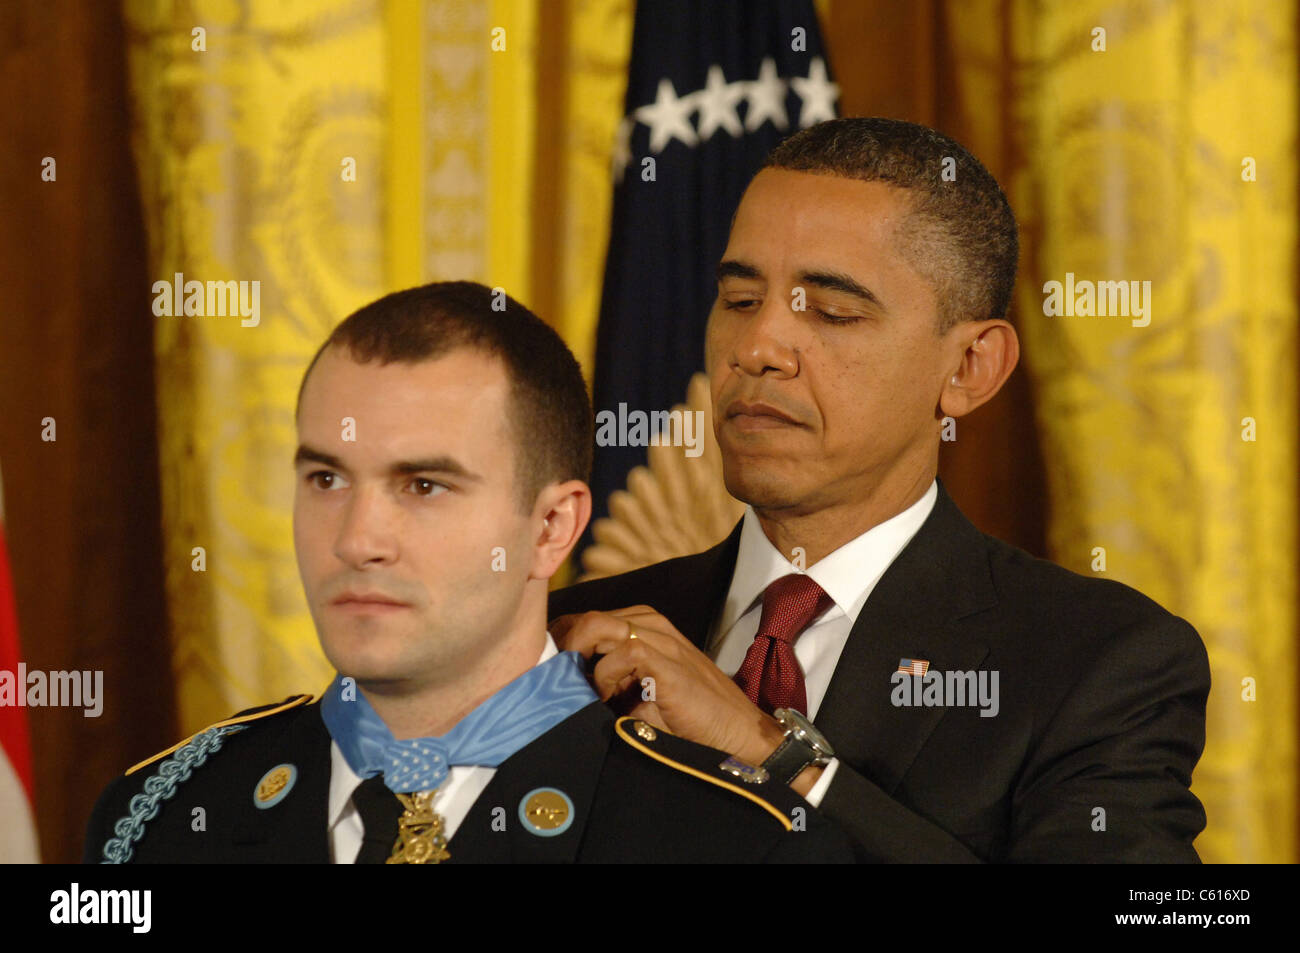 President Obama presents the Medal of Honor to Staff Sergeant Salvatore Giunta for valor and saving the lives of his squad In Afghanistan in 2007. Nov. 16 2010. (BSWH 2011 8 369) Stock Photo